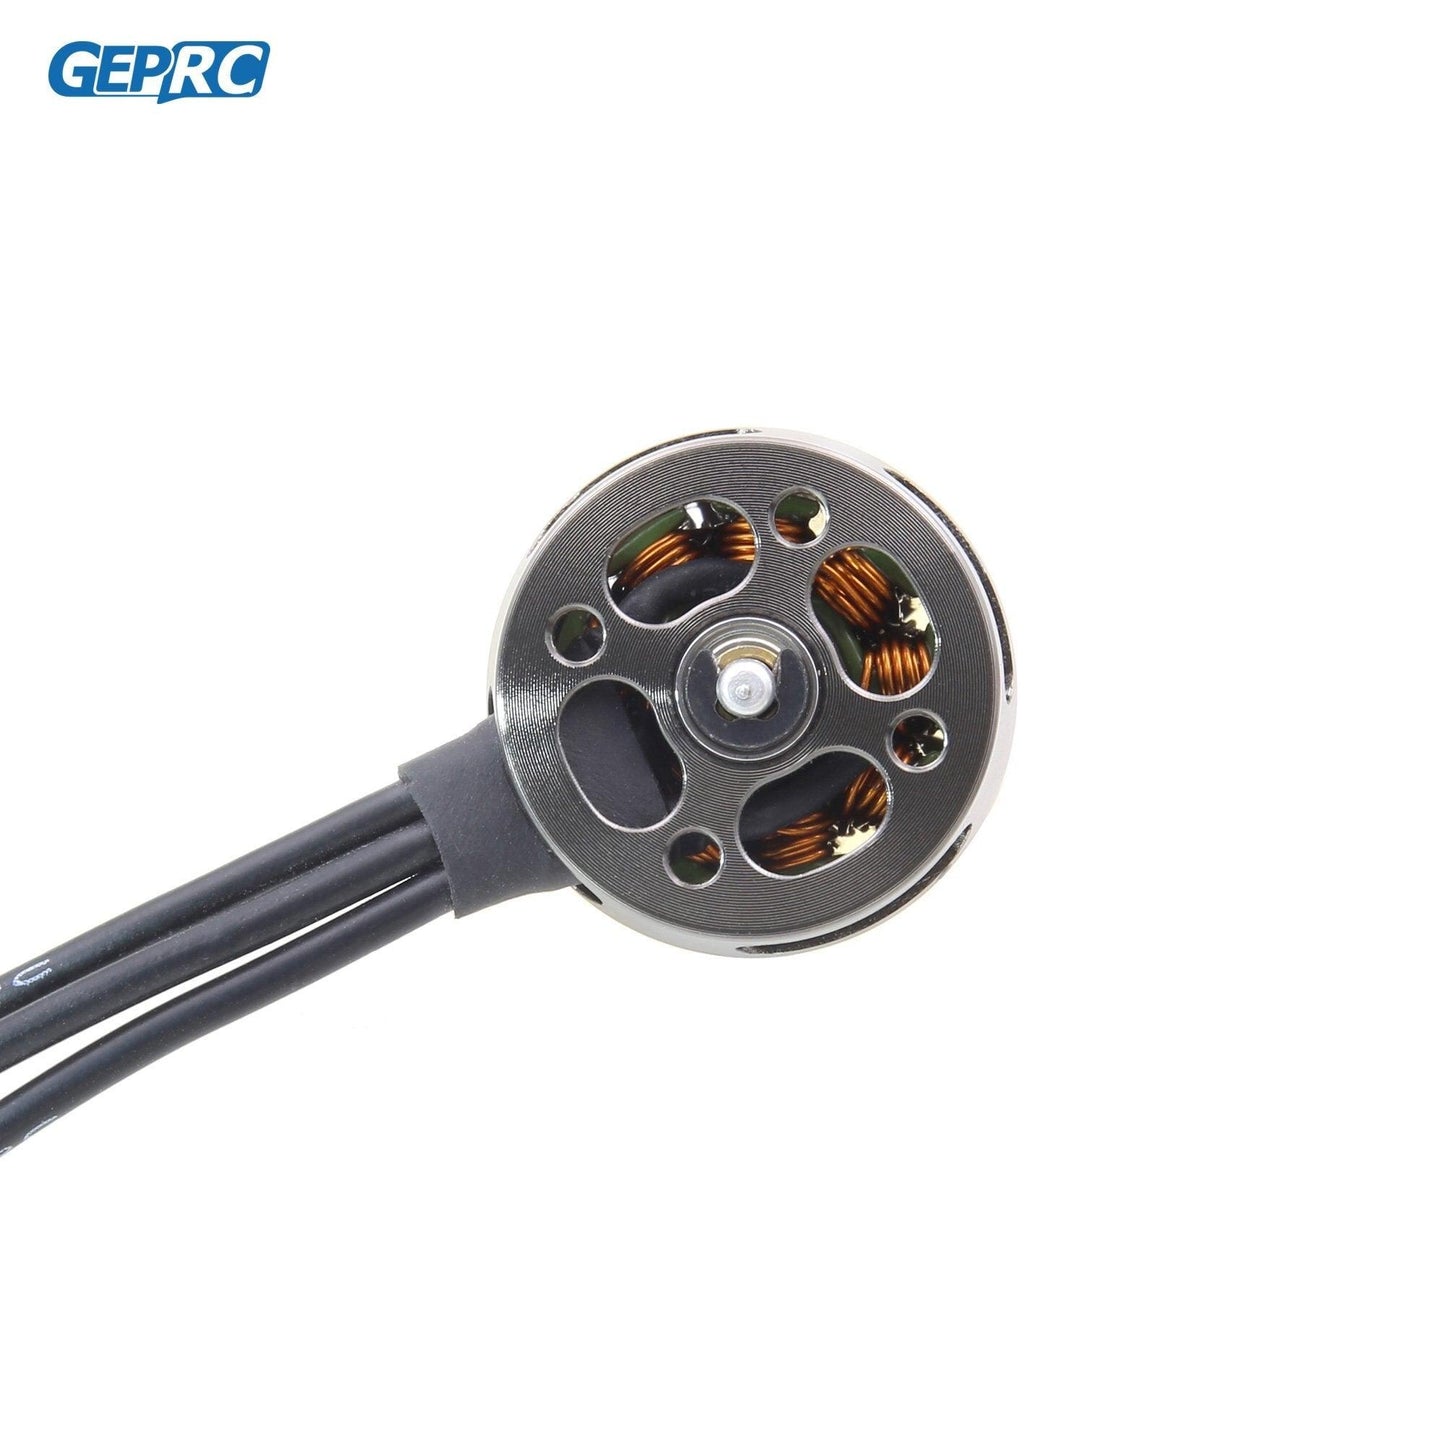 GEPRC GR1408 3500KV Motor - Suitable For DIY RC FPV Quadcopter Racing Drone Accessories Replacement Parts - RCDrone